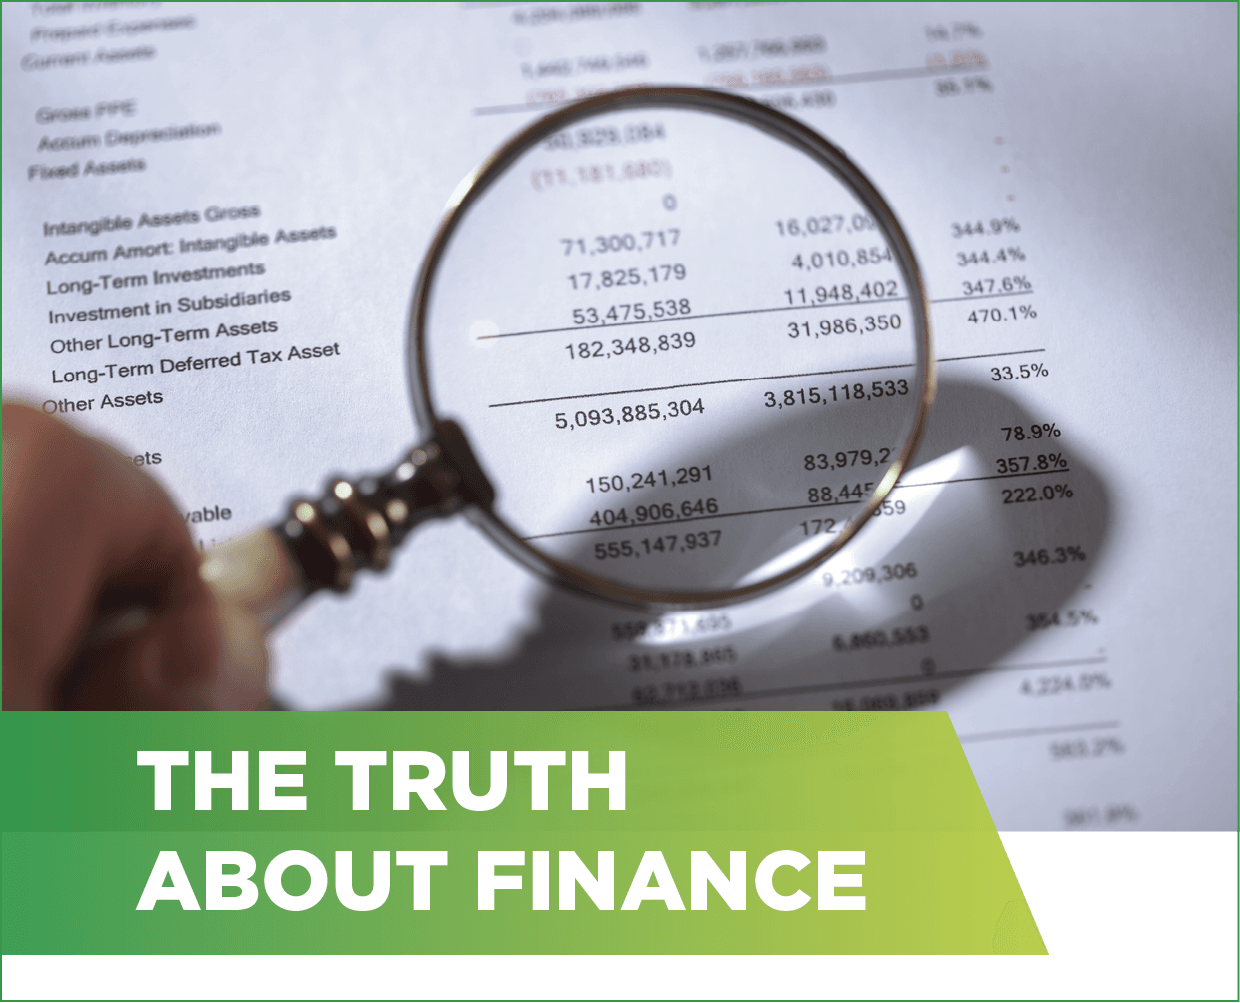 The truth about finance